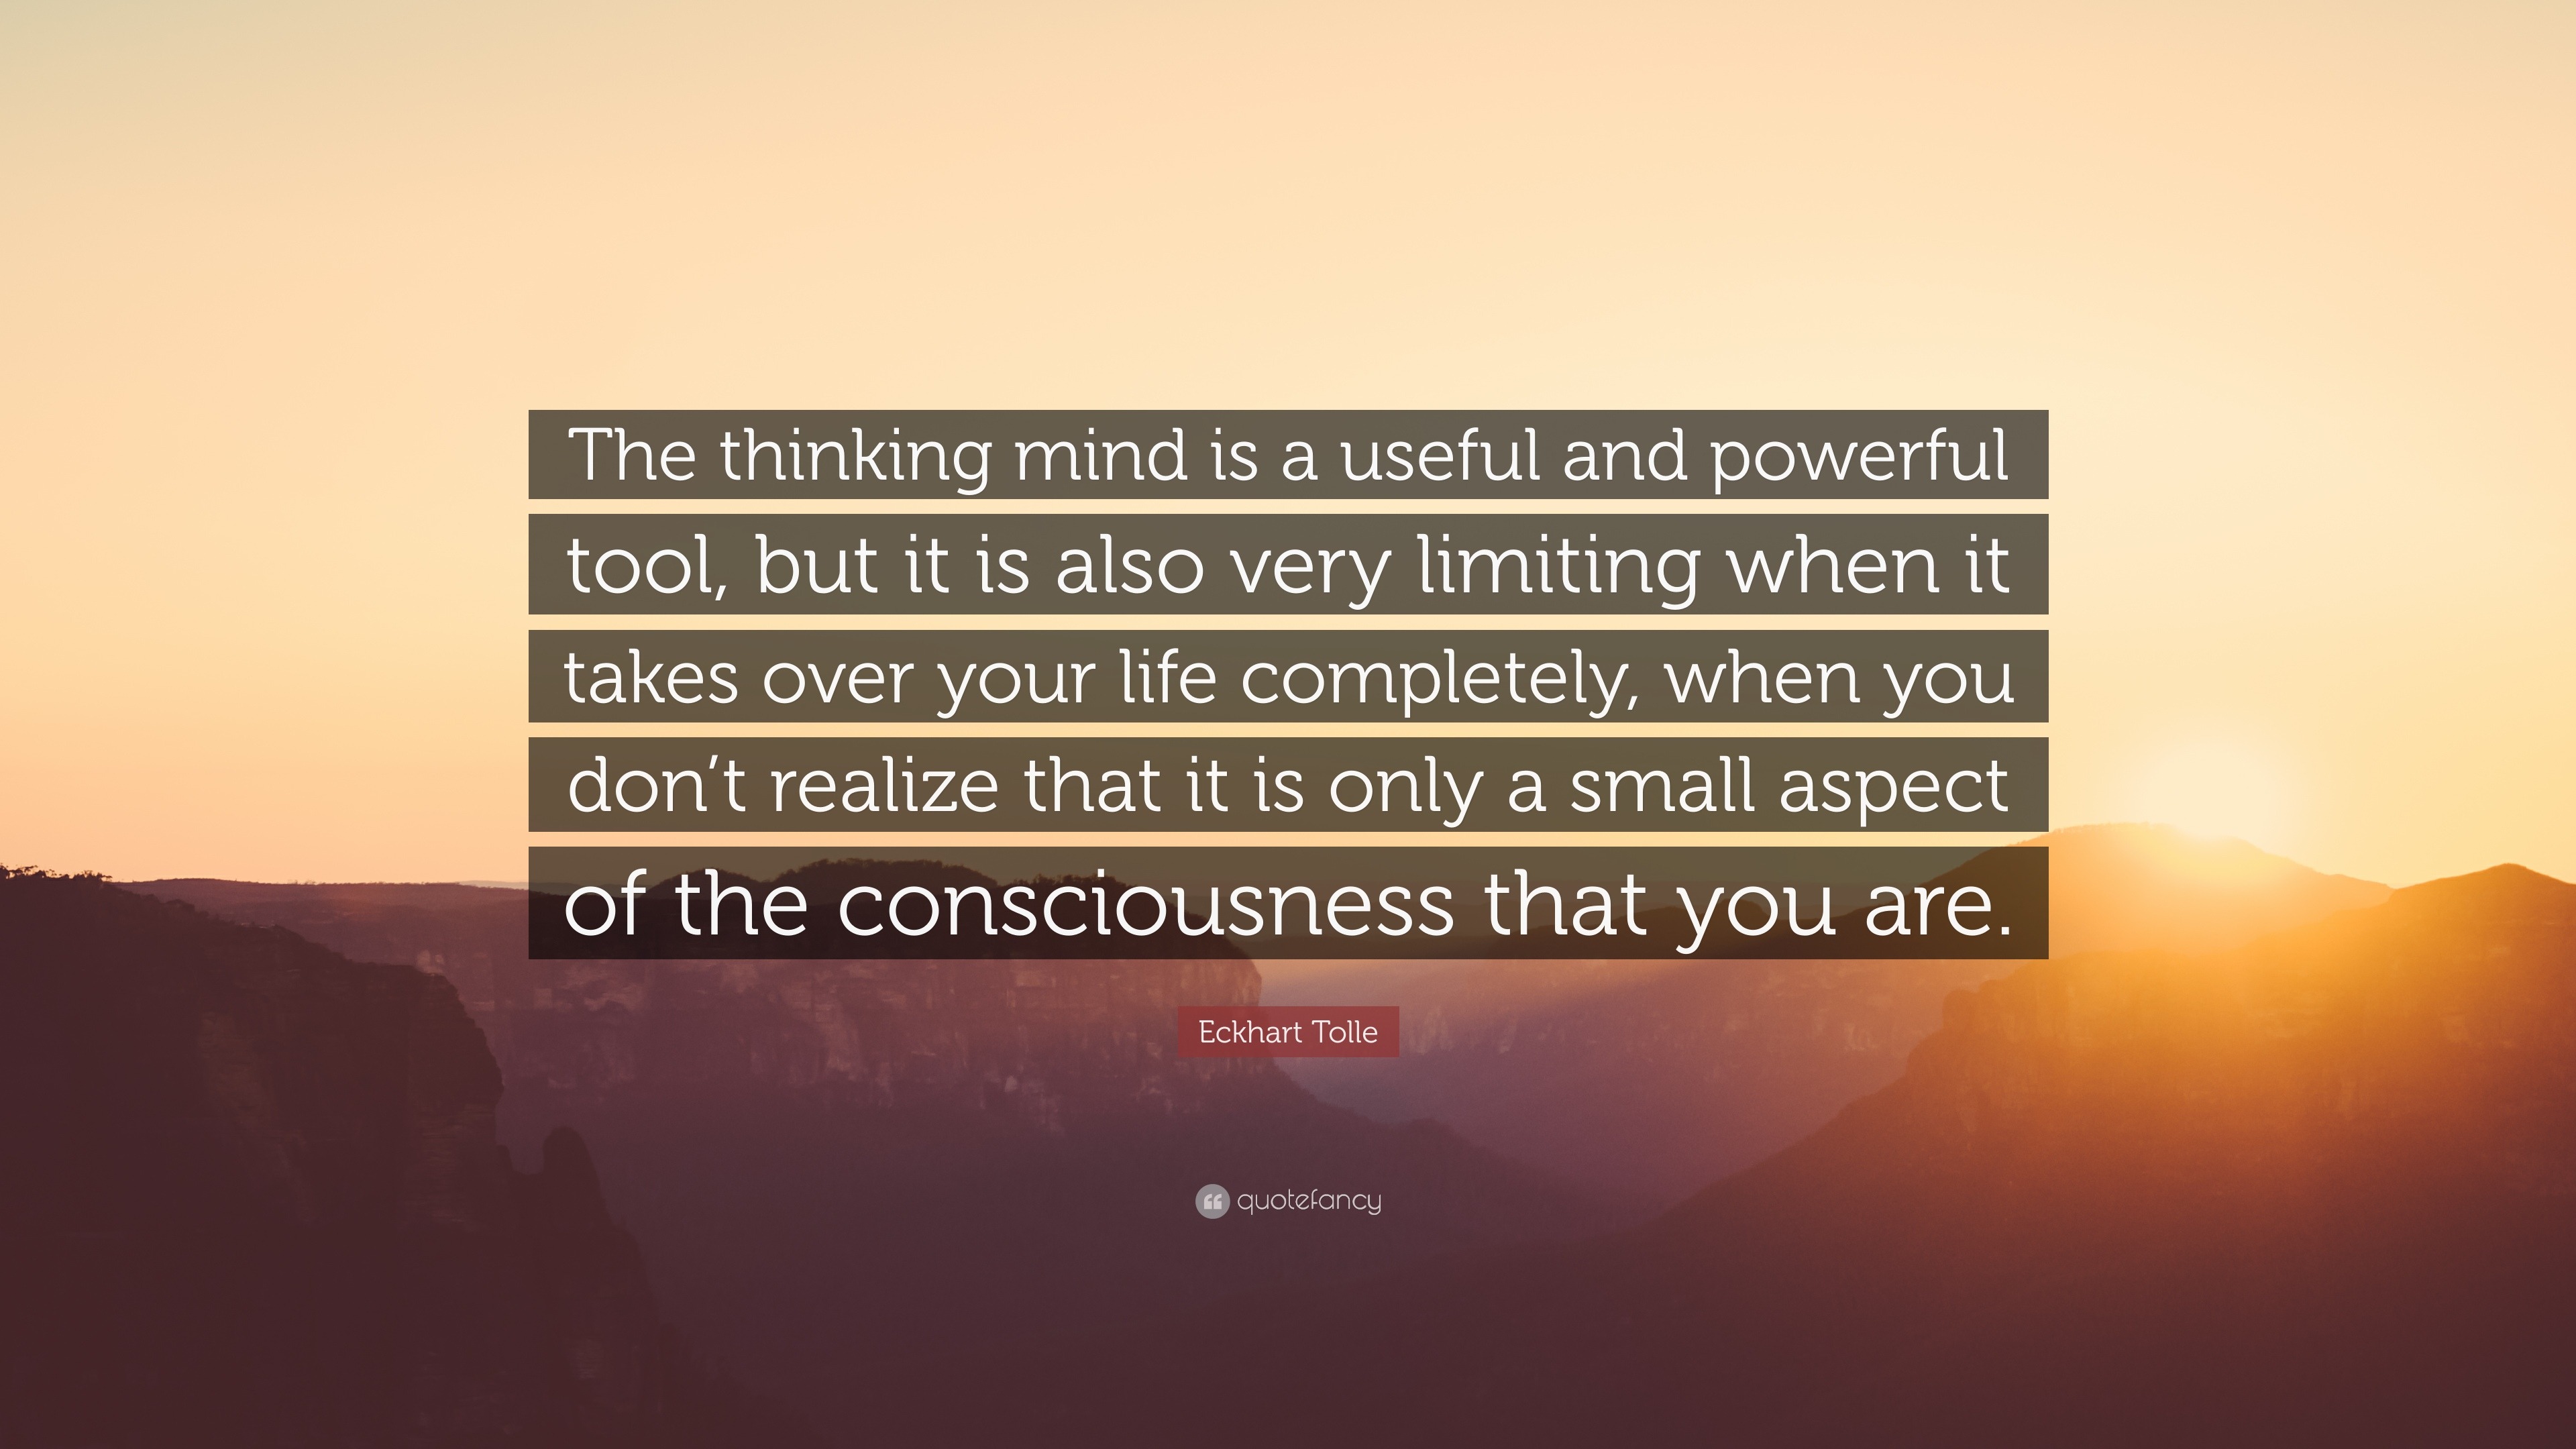 Eckhart Tolle Quote: “The thinking mind is a useful and powerful tool ...